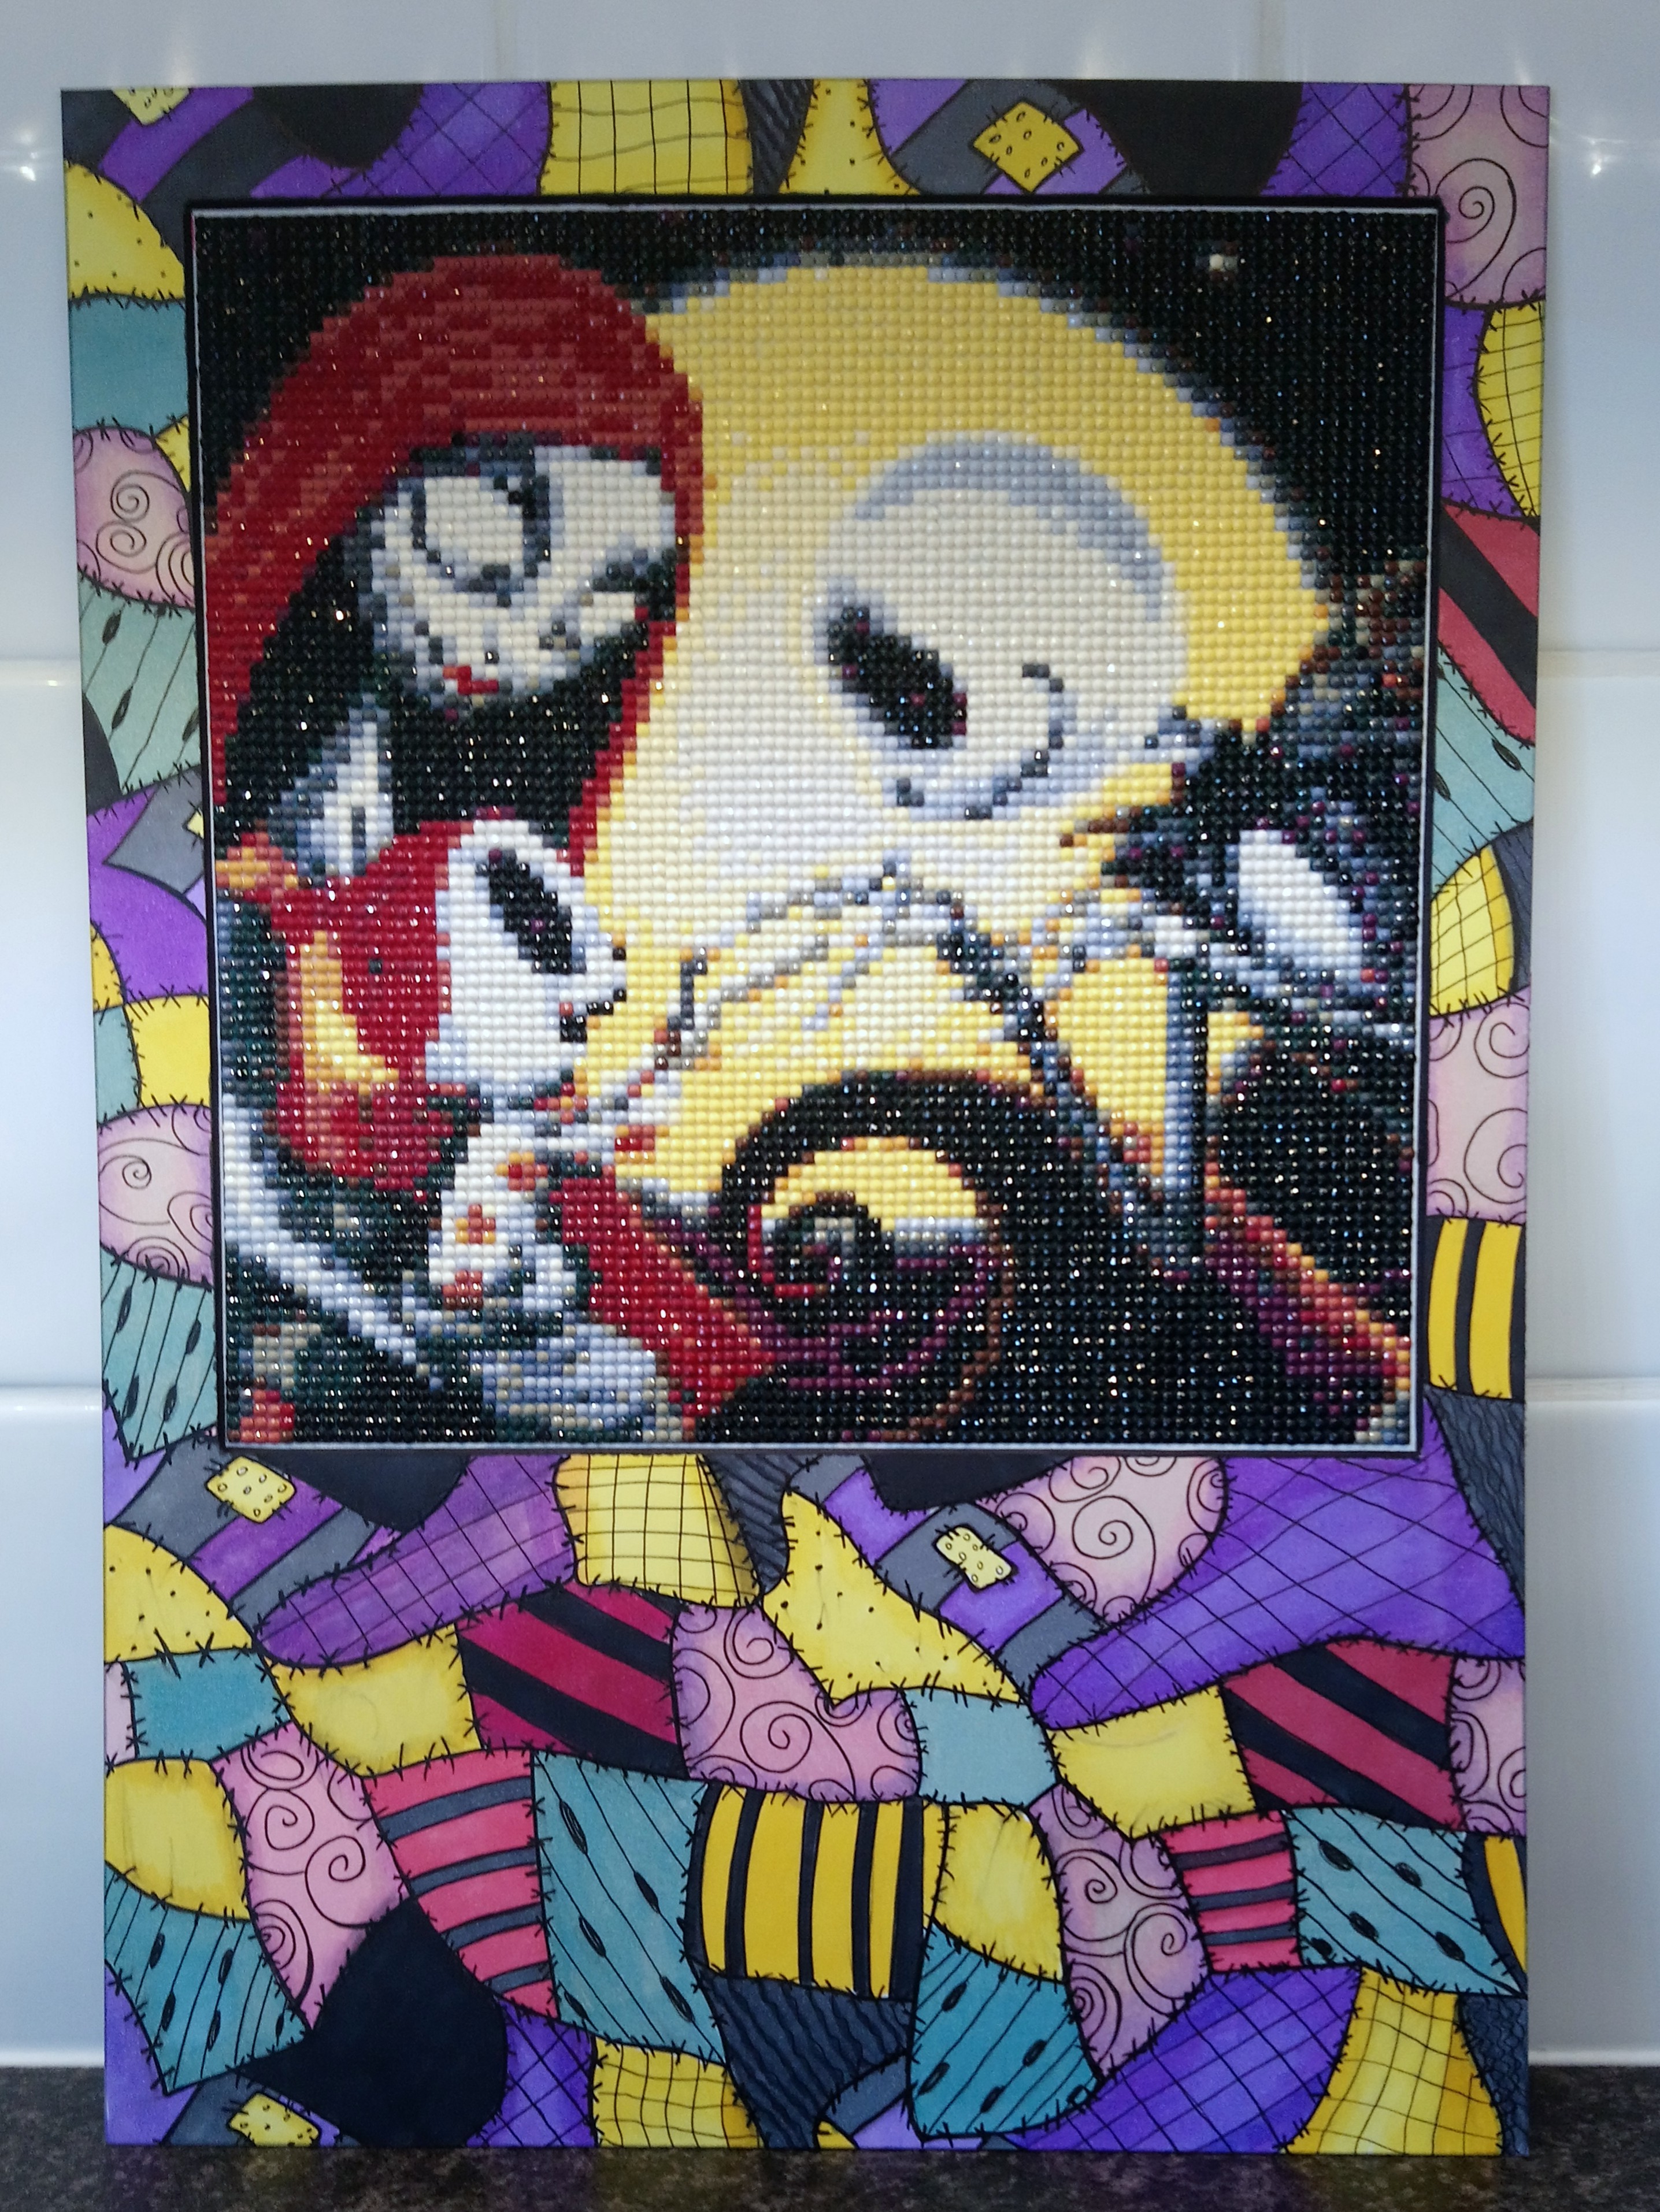 Completed Diamond Painting Nightmare Before Christmas